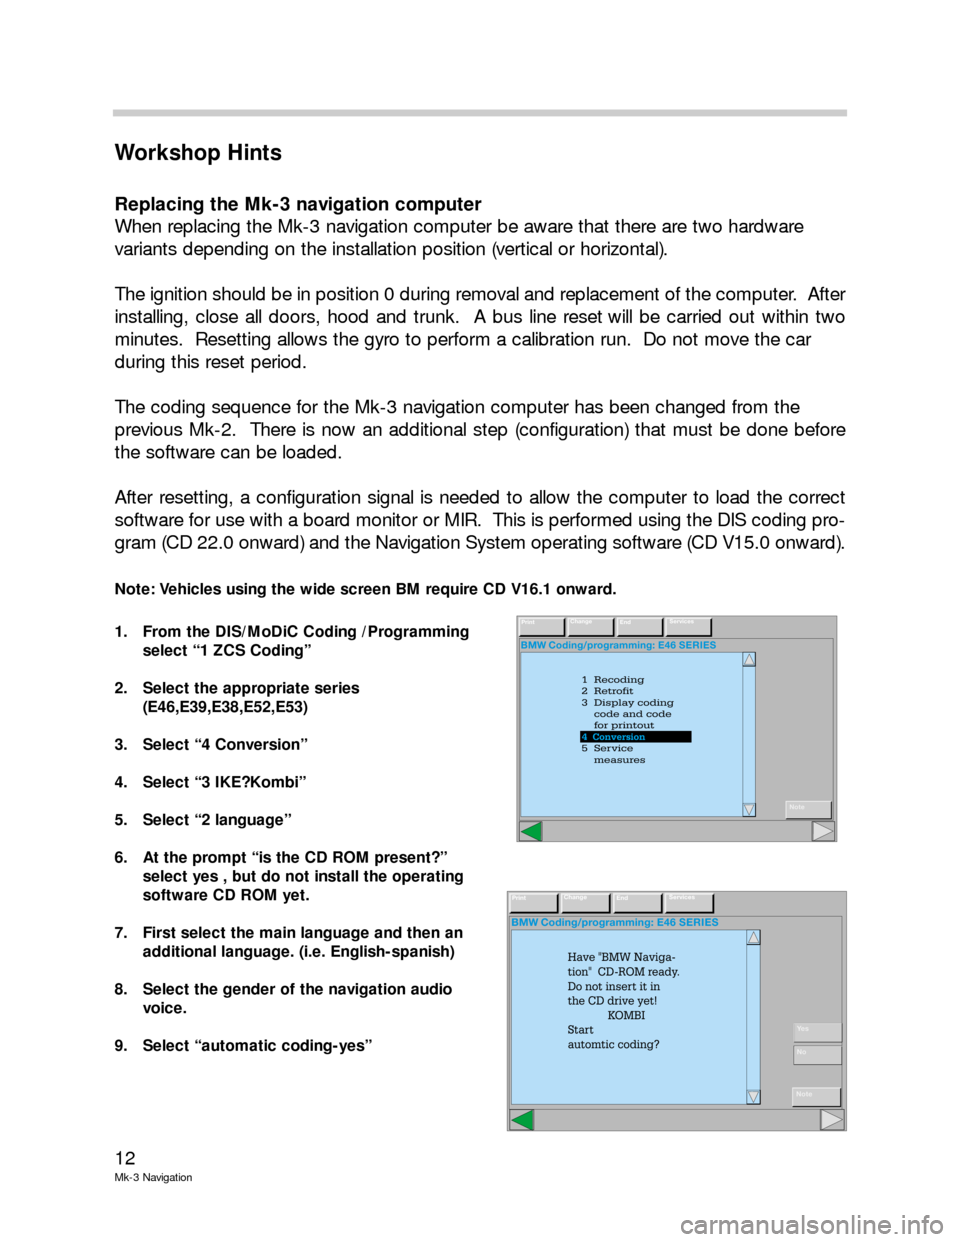 BMW 3 SERIES 2005 E46 Mk3 Navigation System Manual 12
Mk-3 Navigation
Workshop Hints
Replacing the Mk-3 navigation computer
When replacing the Mk-3 navigation computer be aware that there are two hardware 
variants depending on the installation positi